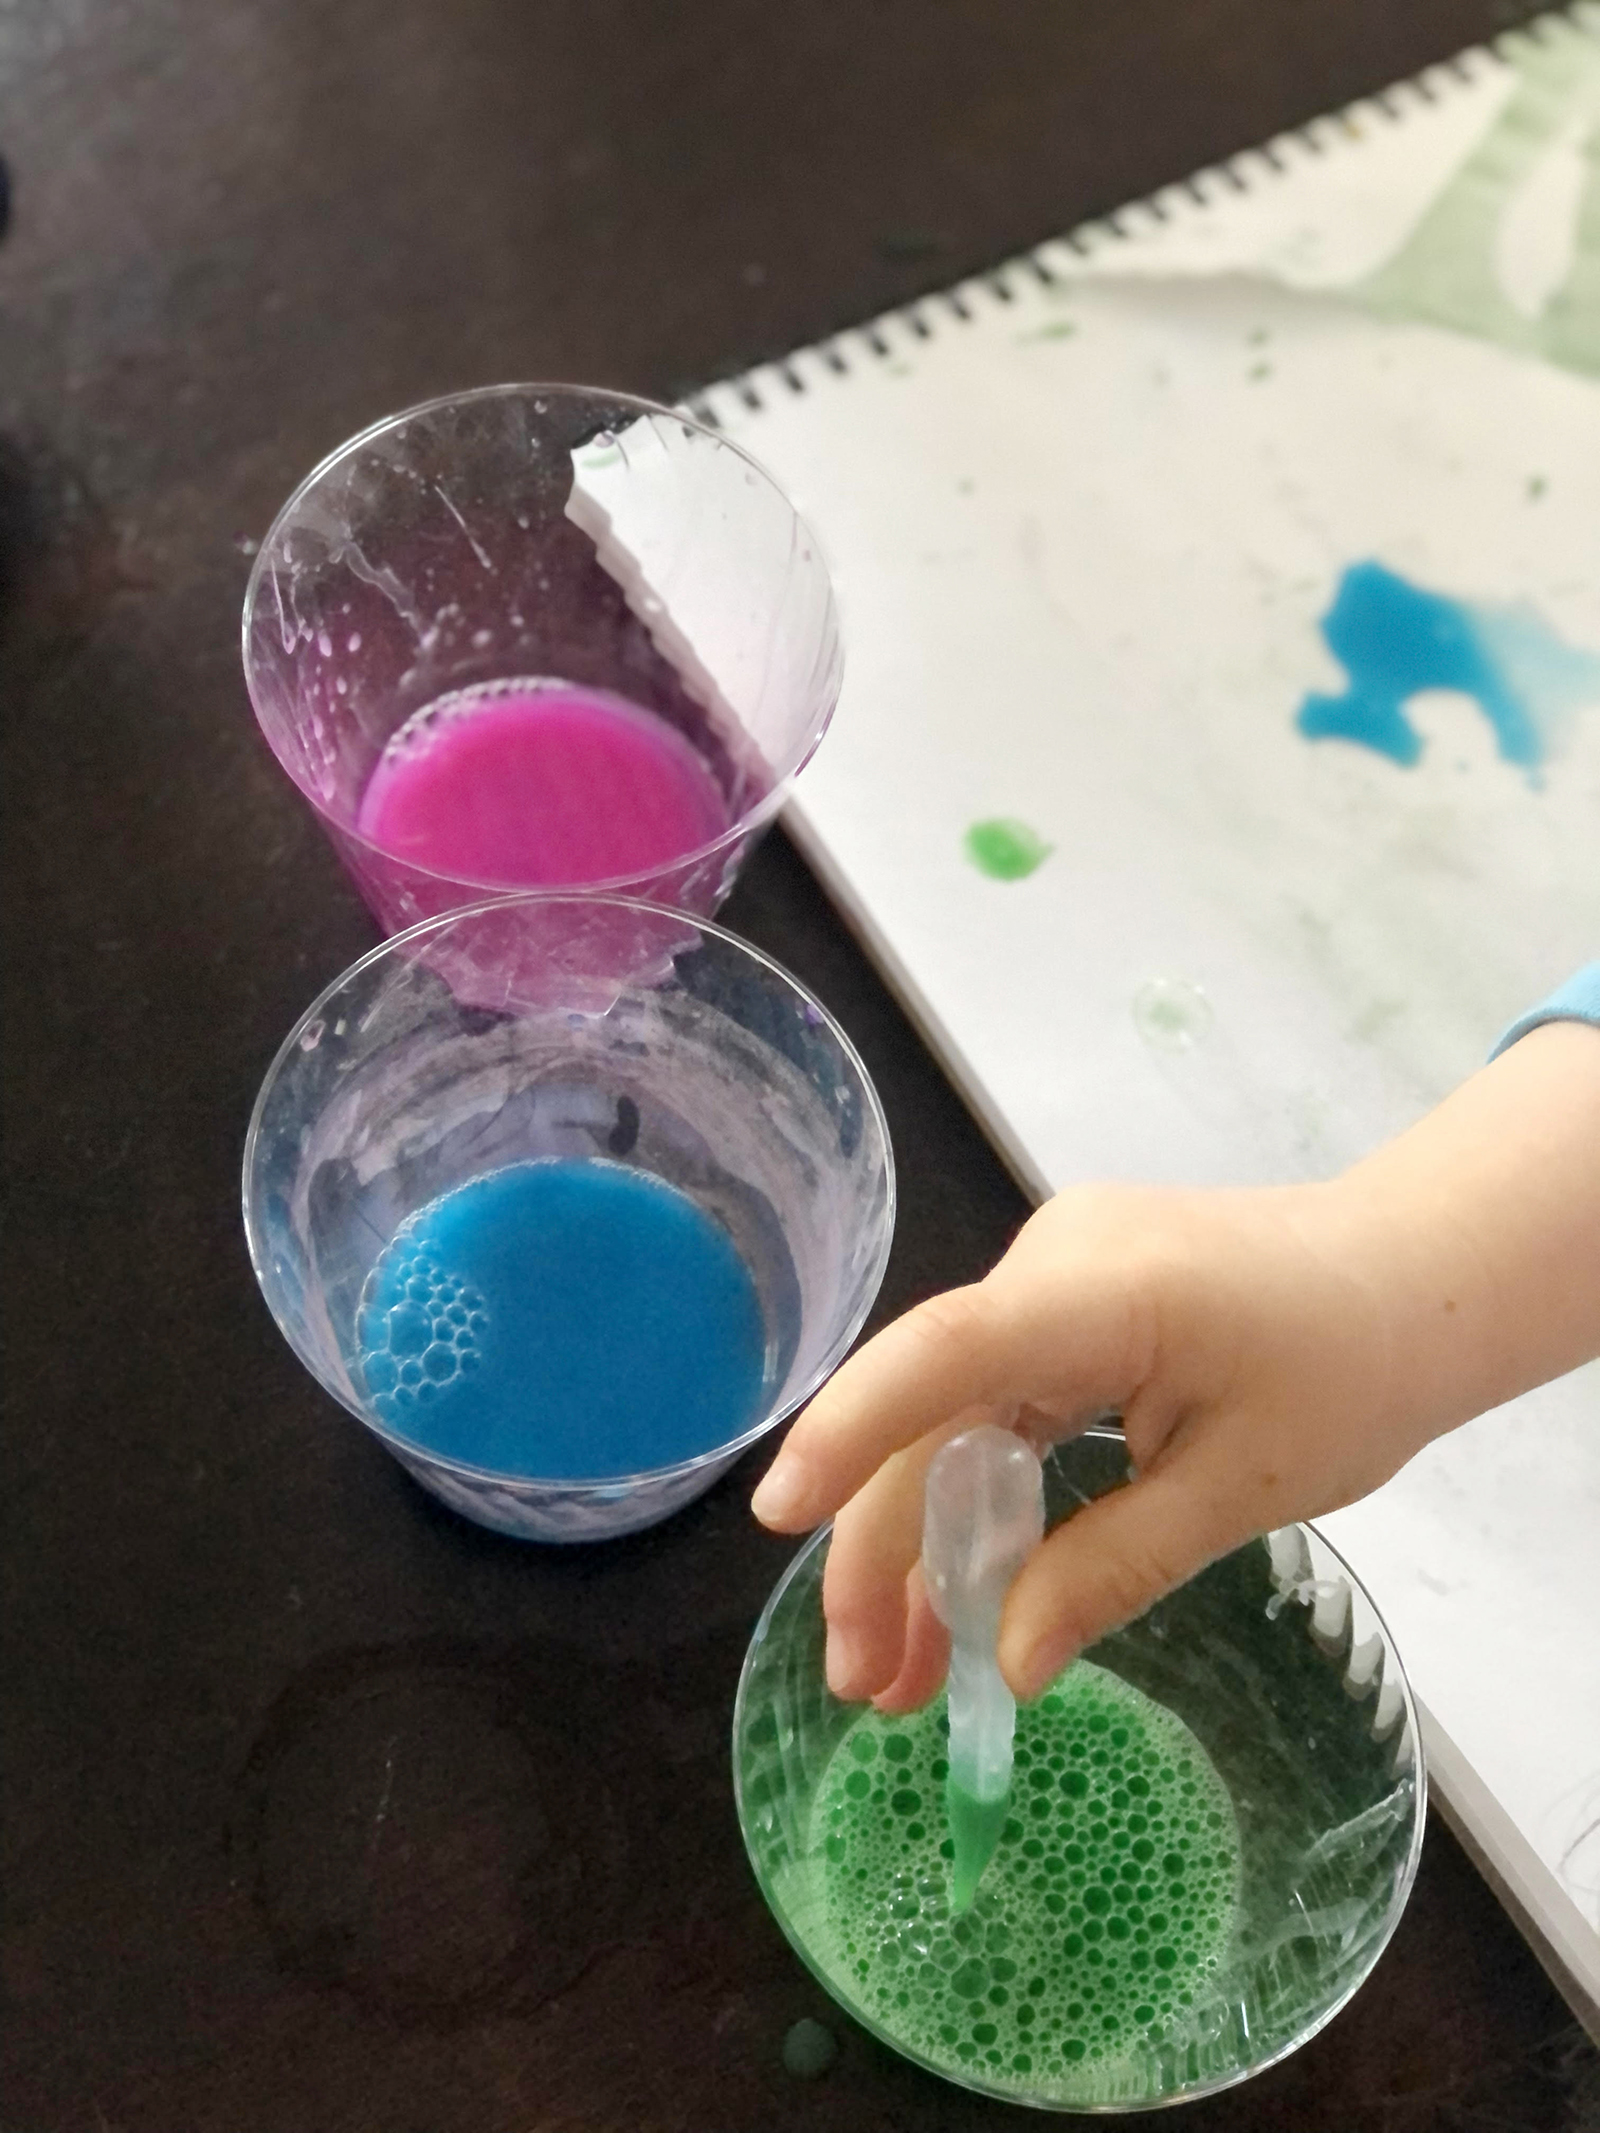 Easy Indoor Toddler Activities /// By Design Fixation #crafts #projects #kids #ideas